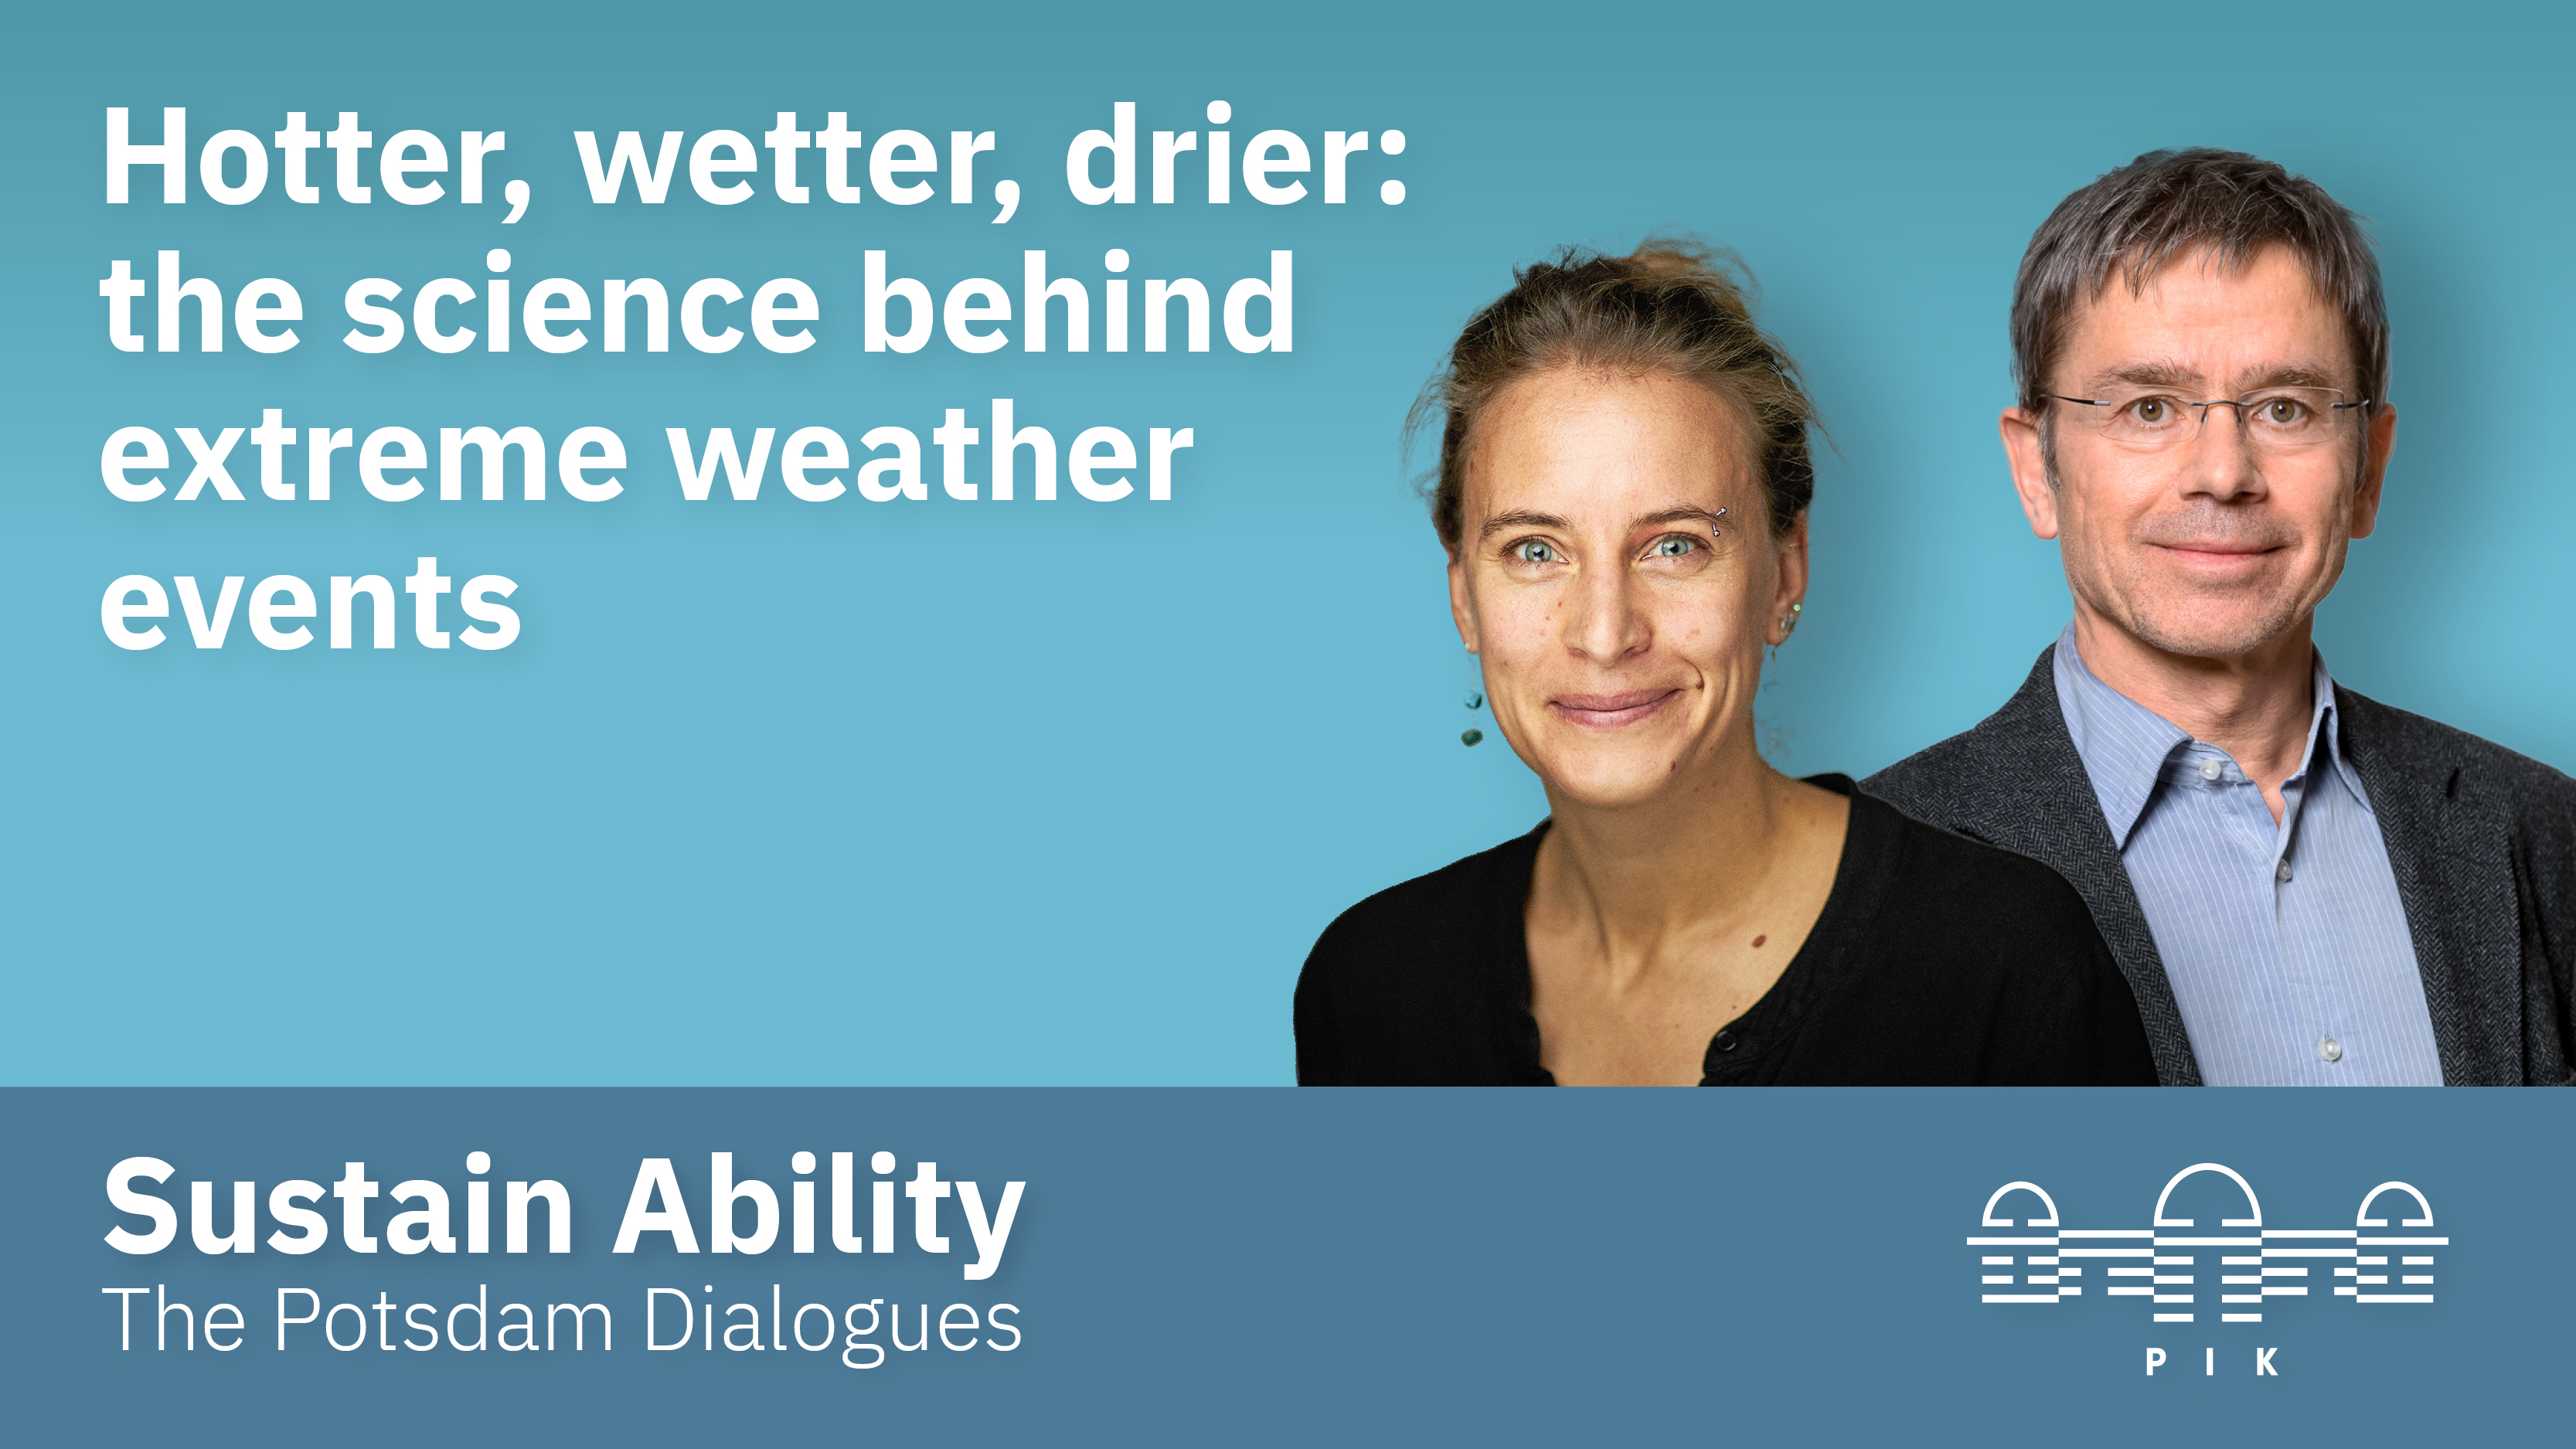 Sustain Ability. The Potsdam Dialogues - Science for a Safe Tomorrow. Episode 2: The science behind extreme weather events